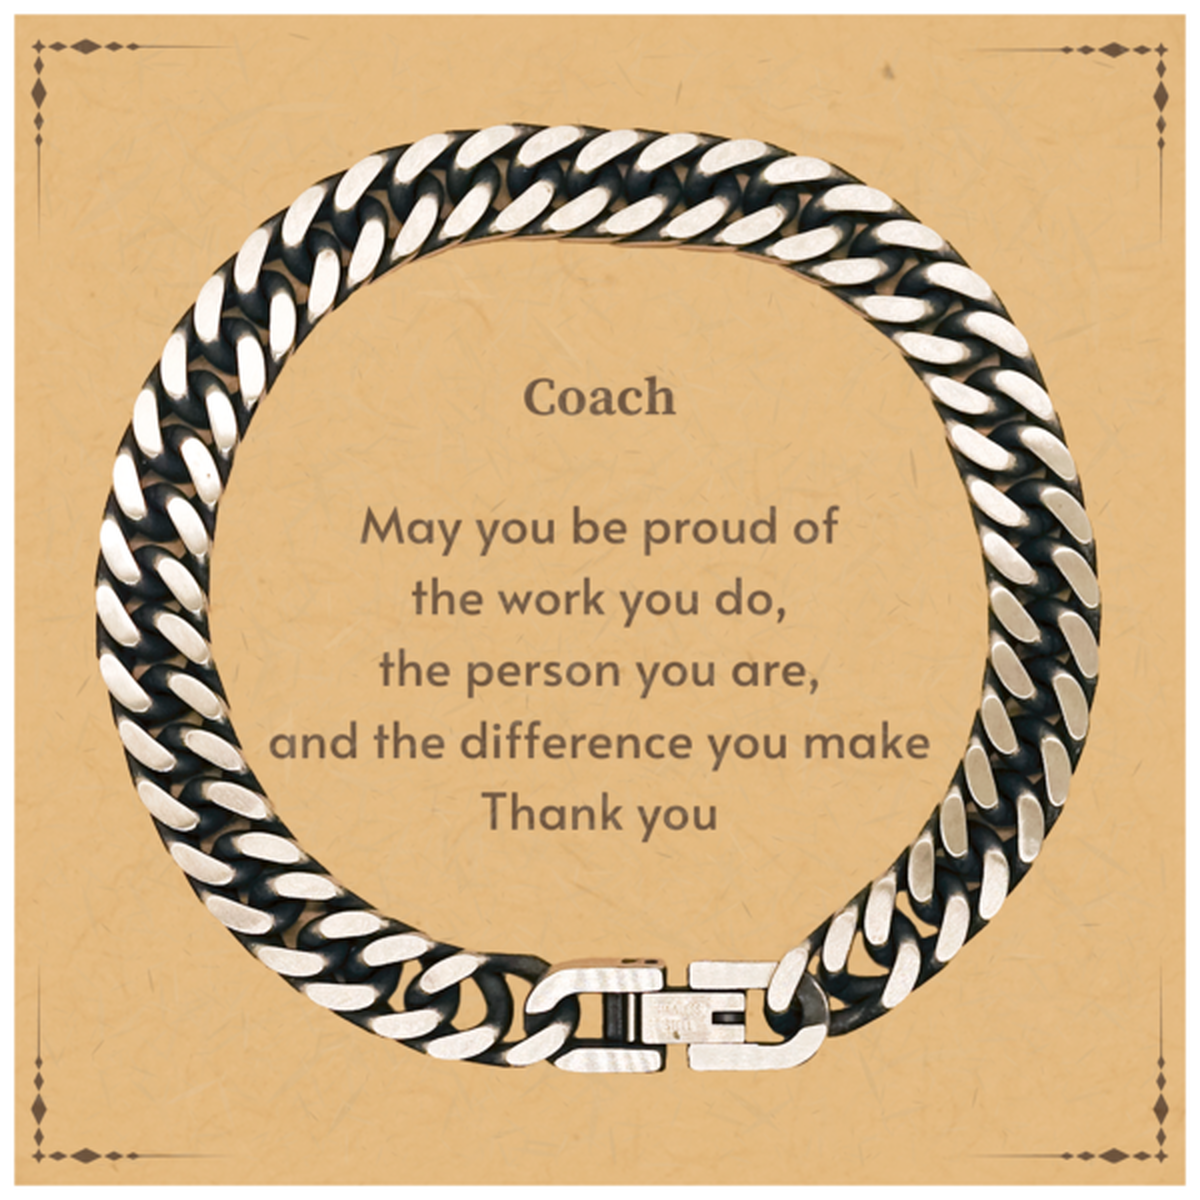 Heartwarming Cuban Link Chain Bracelet Retirement Coworkers Gifts for Coach, Coach May You be proud of the work you do, the person you are Gifts for Boss Men Women Friends